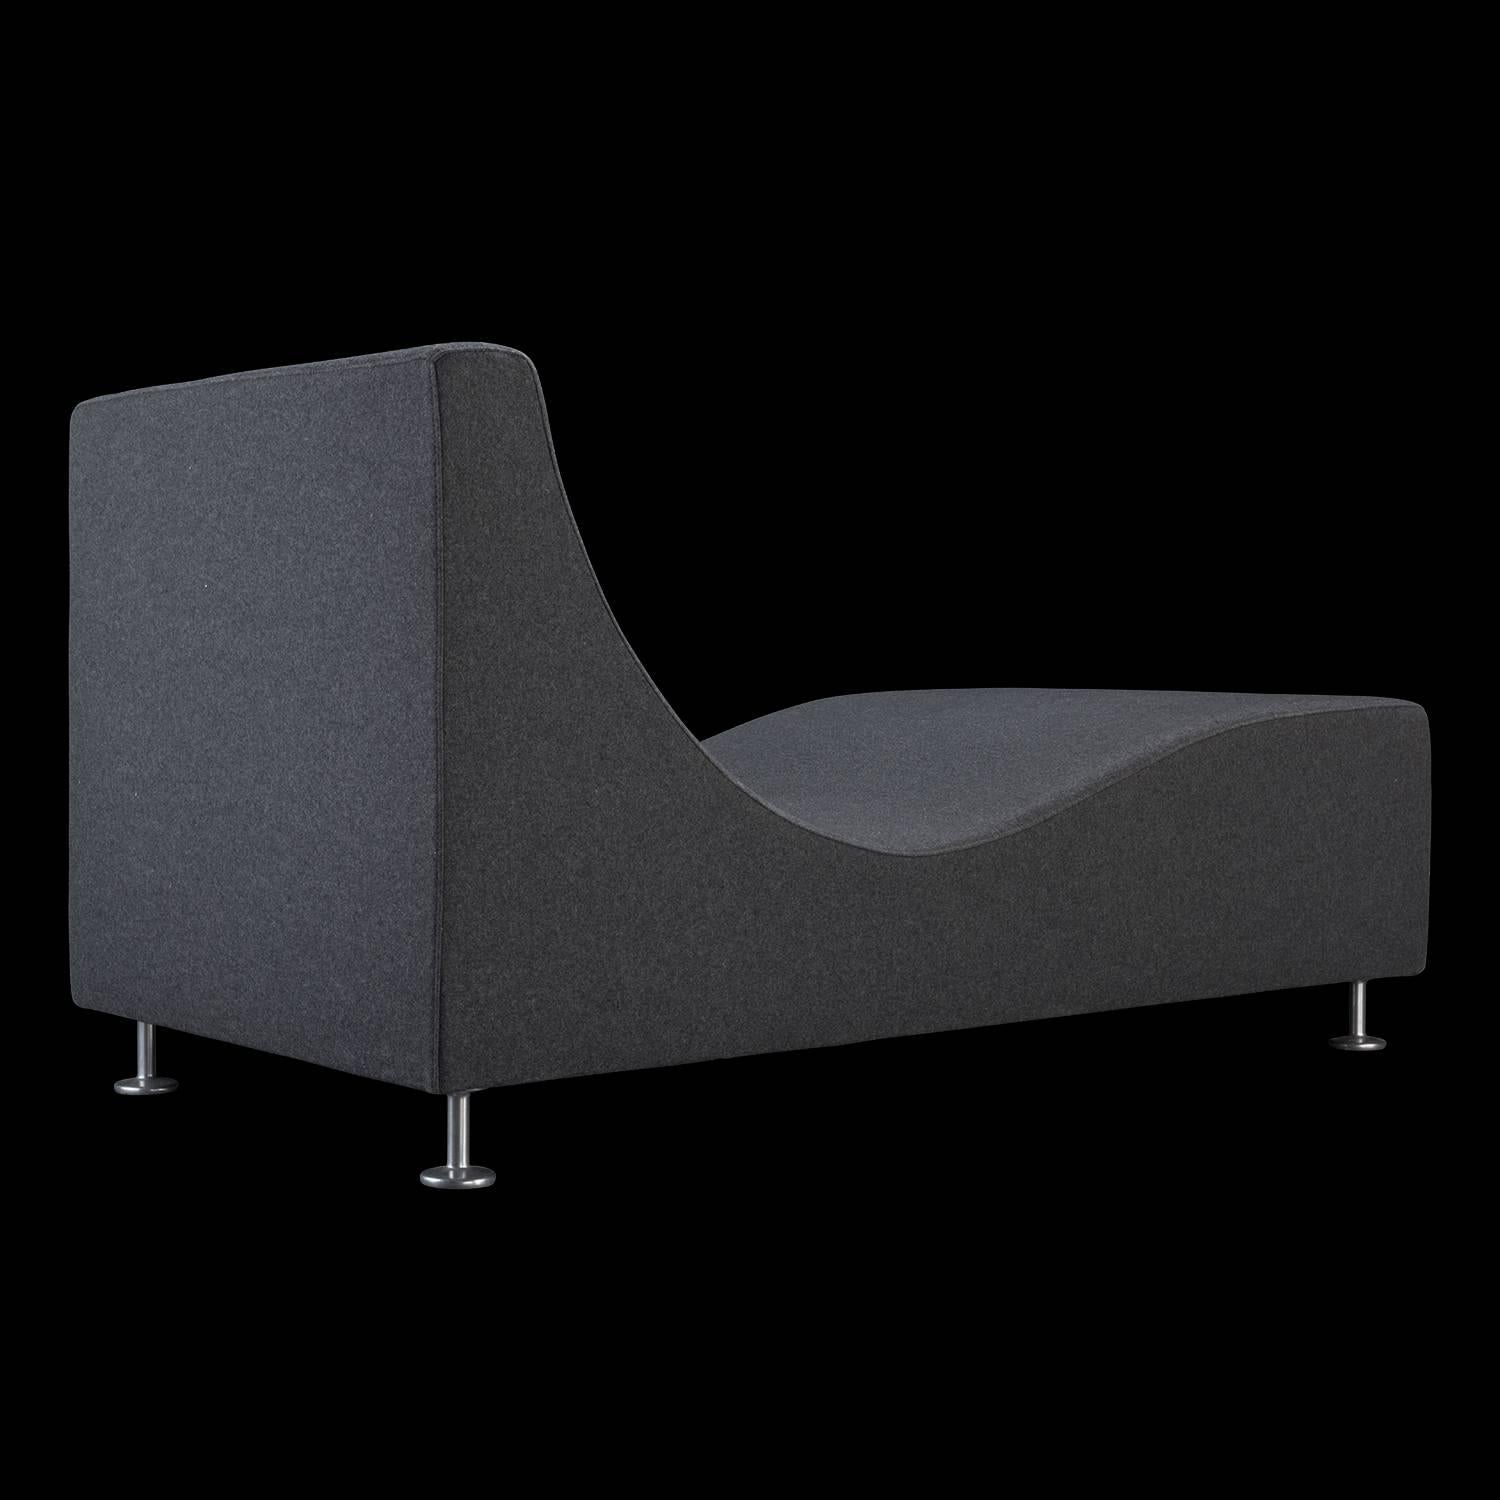 Upholstered in grey fabric with die-cast polished aluminum feet. Produced by Cappellini.